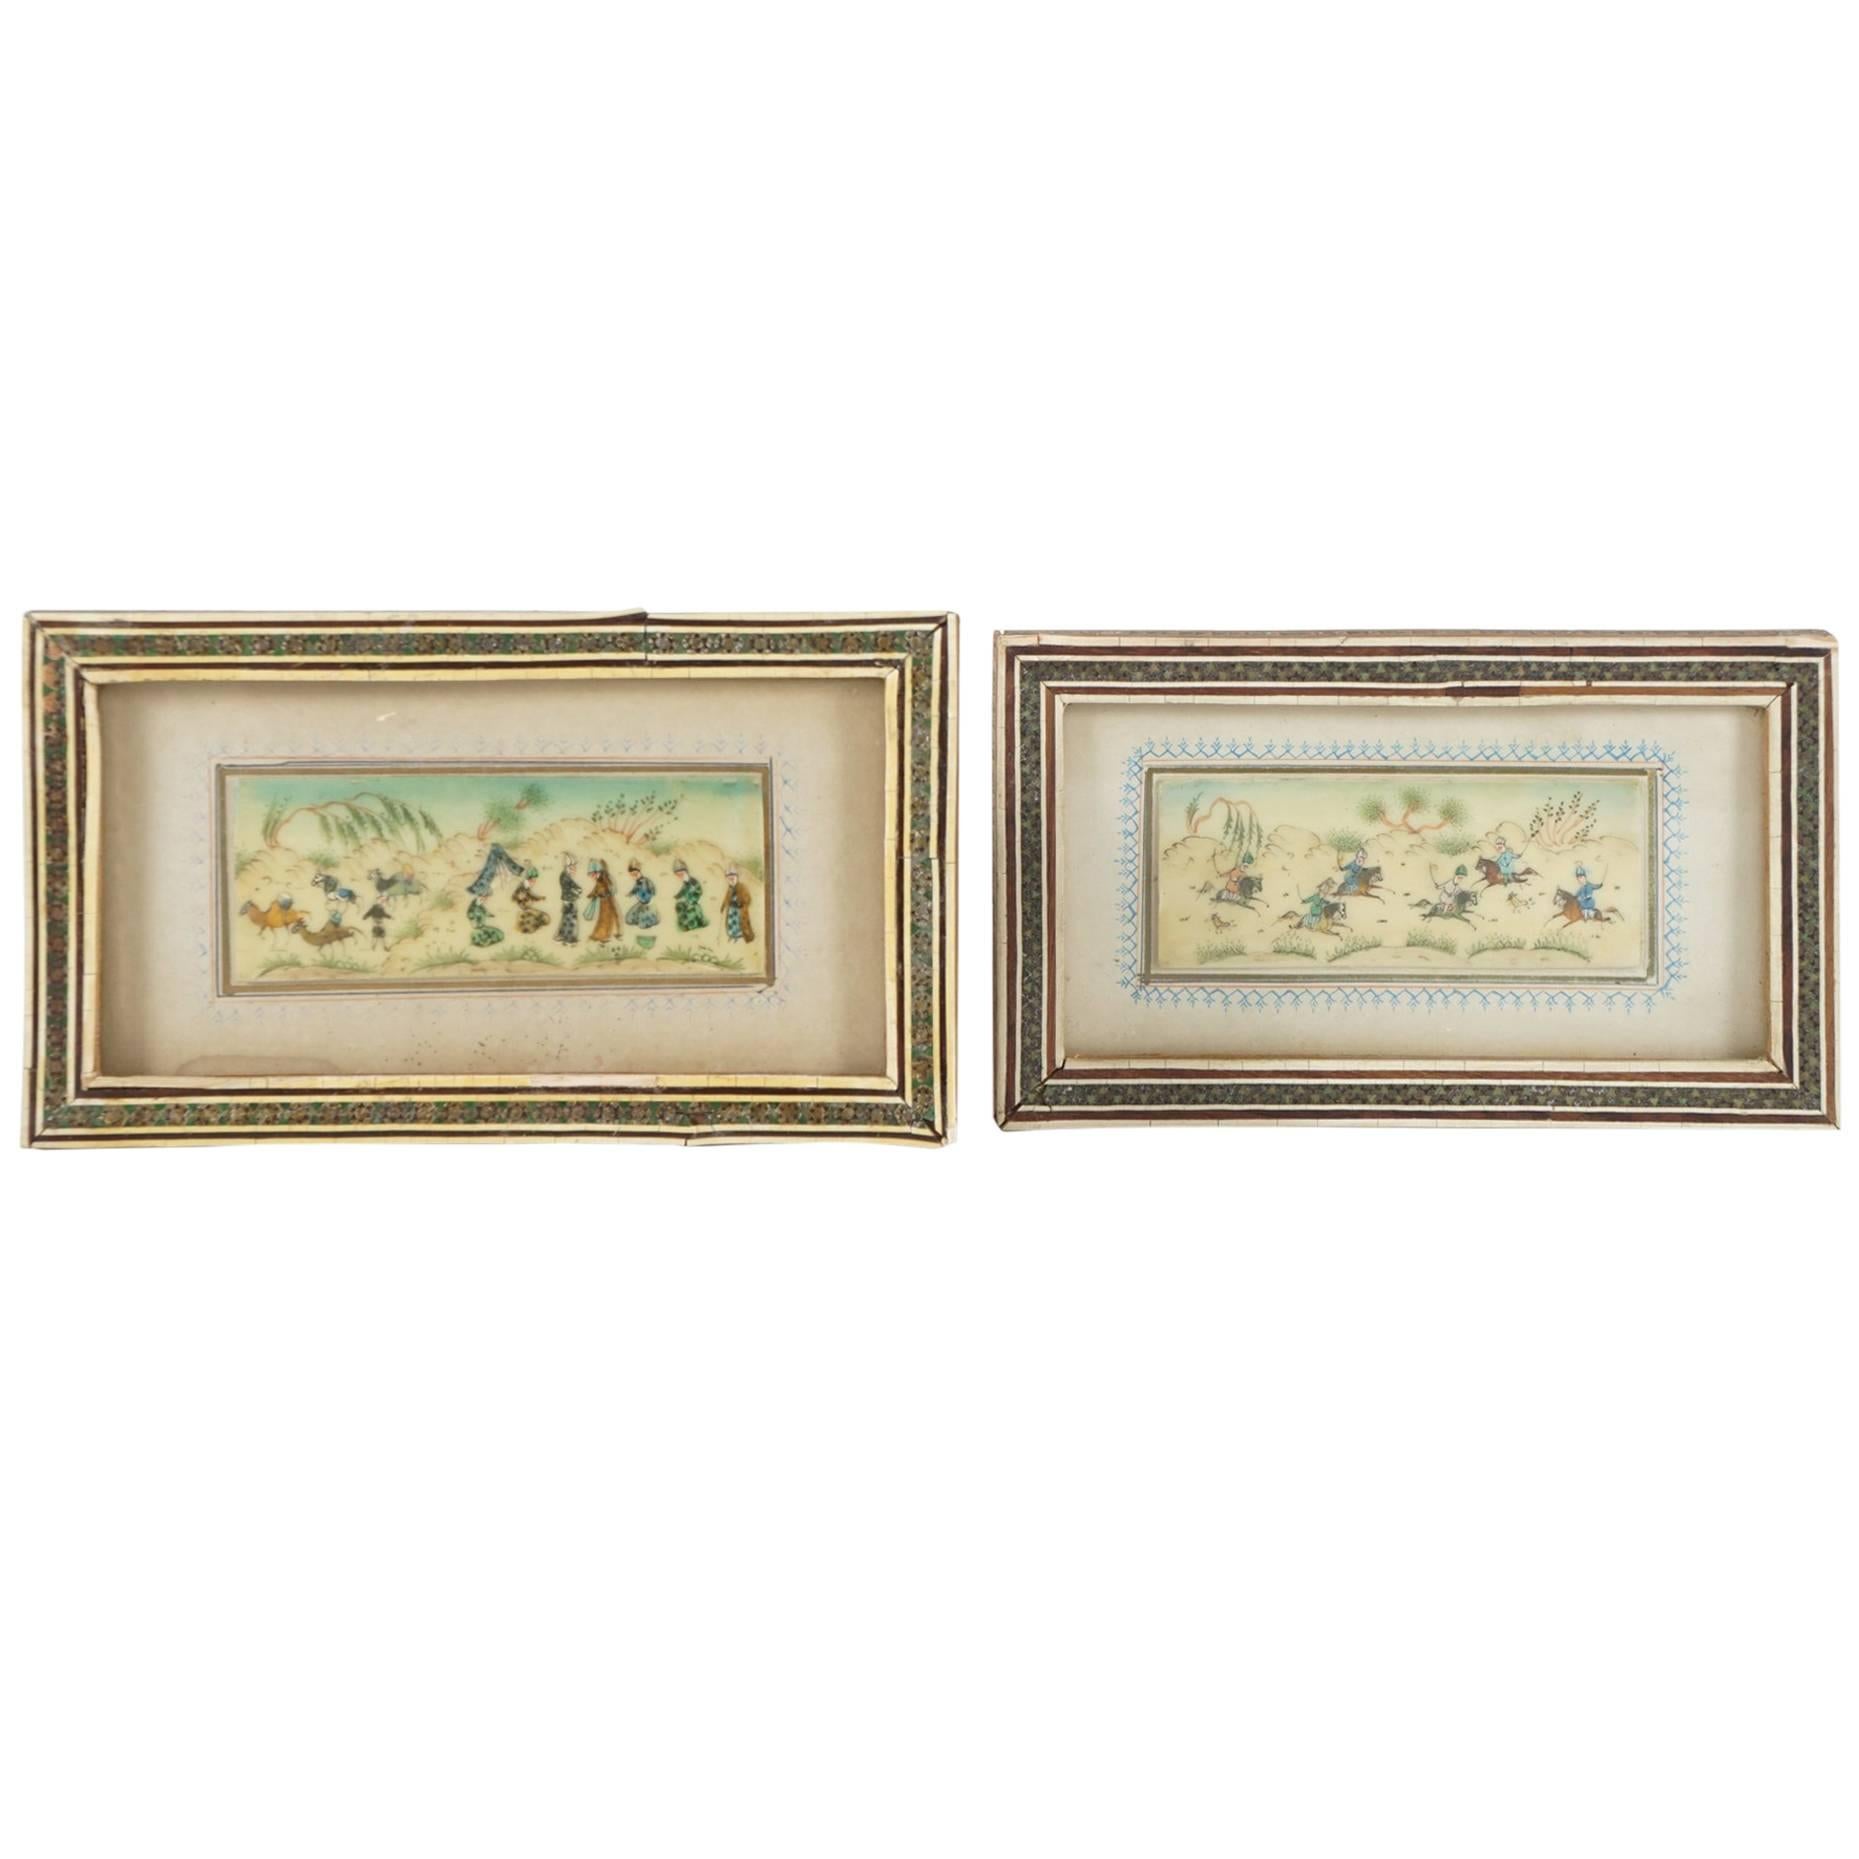 Pair of Miniature Persian Paintings from the Estate of Bunny Mellon